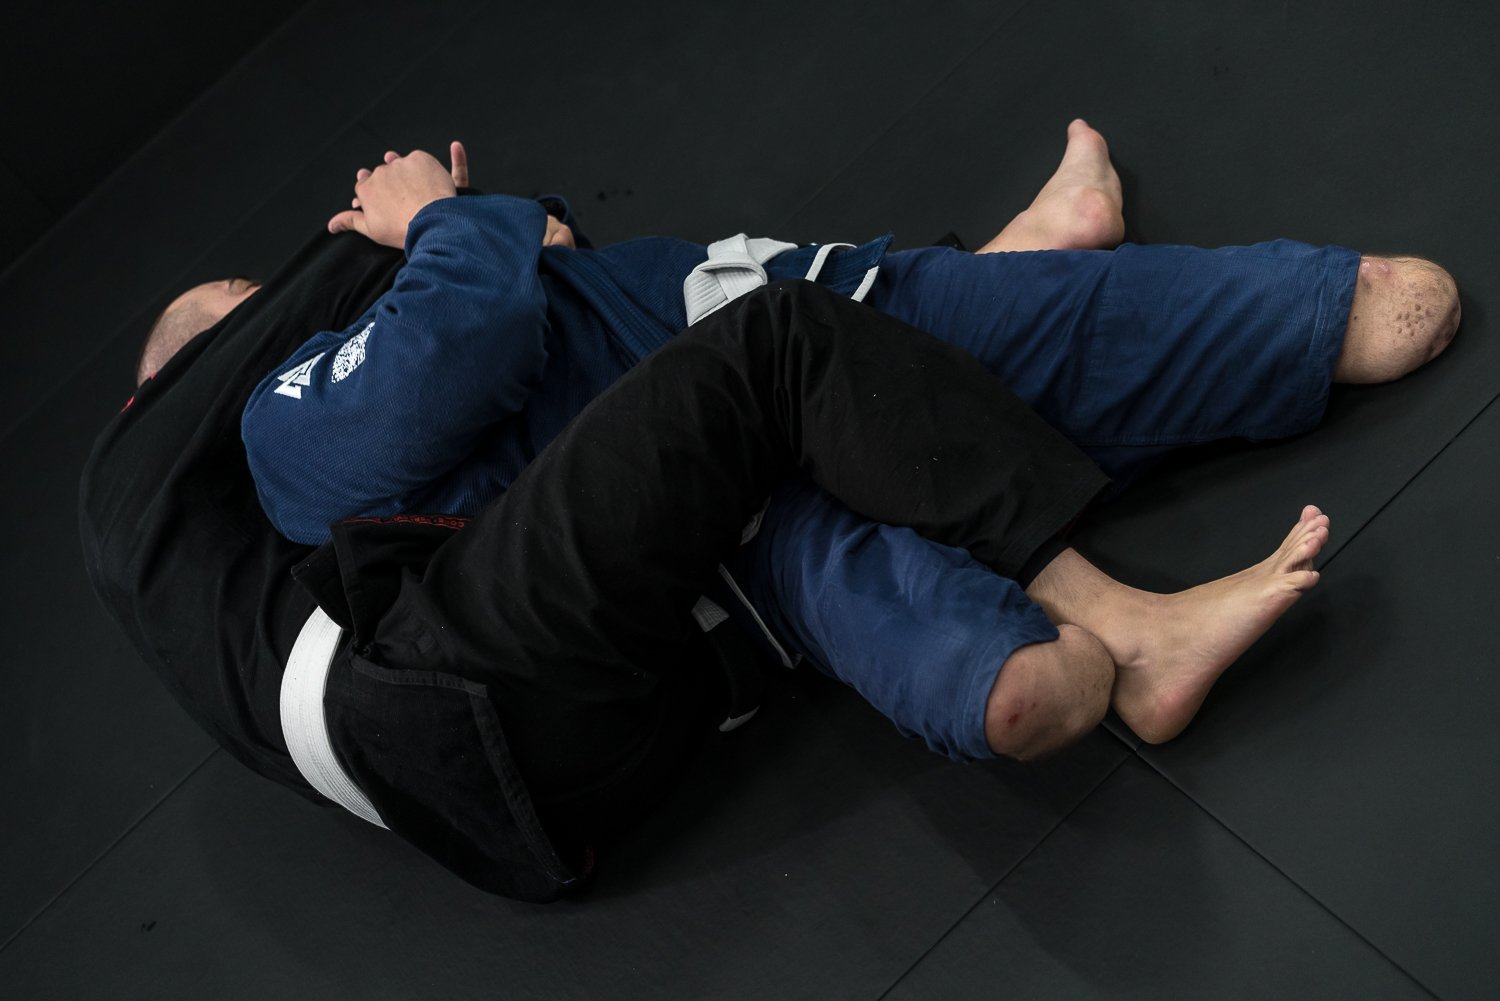  Vasyl Oksantiuk, 26, in blue, trains with Boroda, who could not give his name, during a Brazilian jiu jitsu class offered for free to Ukrainian military veterans at TMS Hub on Monday, October 9, 2023 in Kyiv, Ukraine. 